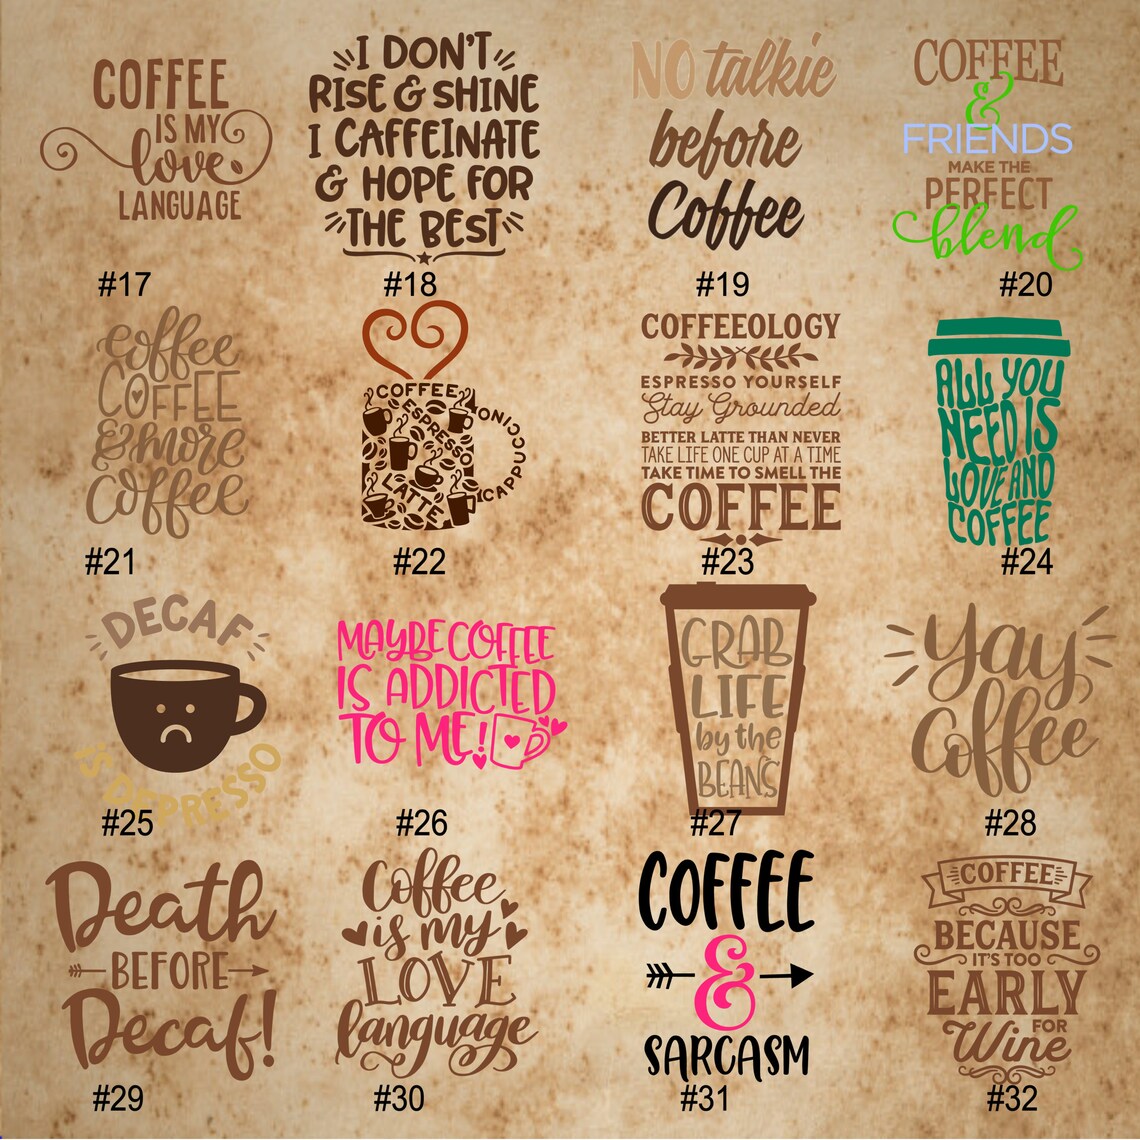 CFE17 32 COFFEE QUOTE vinyl decal  latte lover  car  decal  Etsy